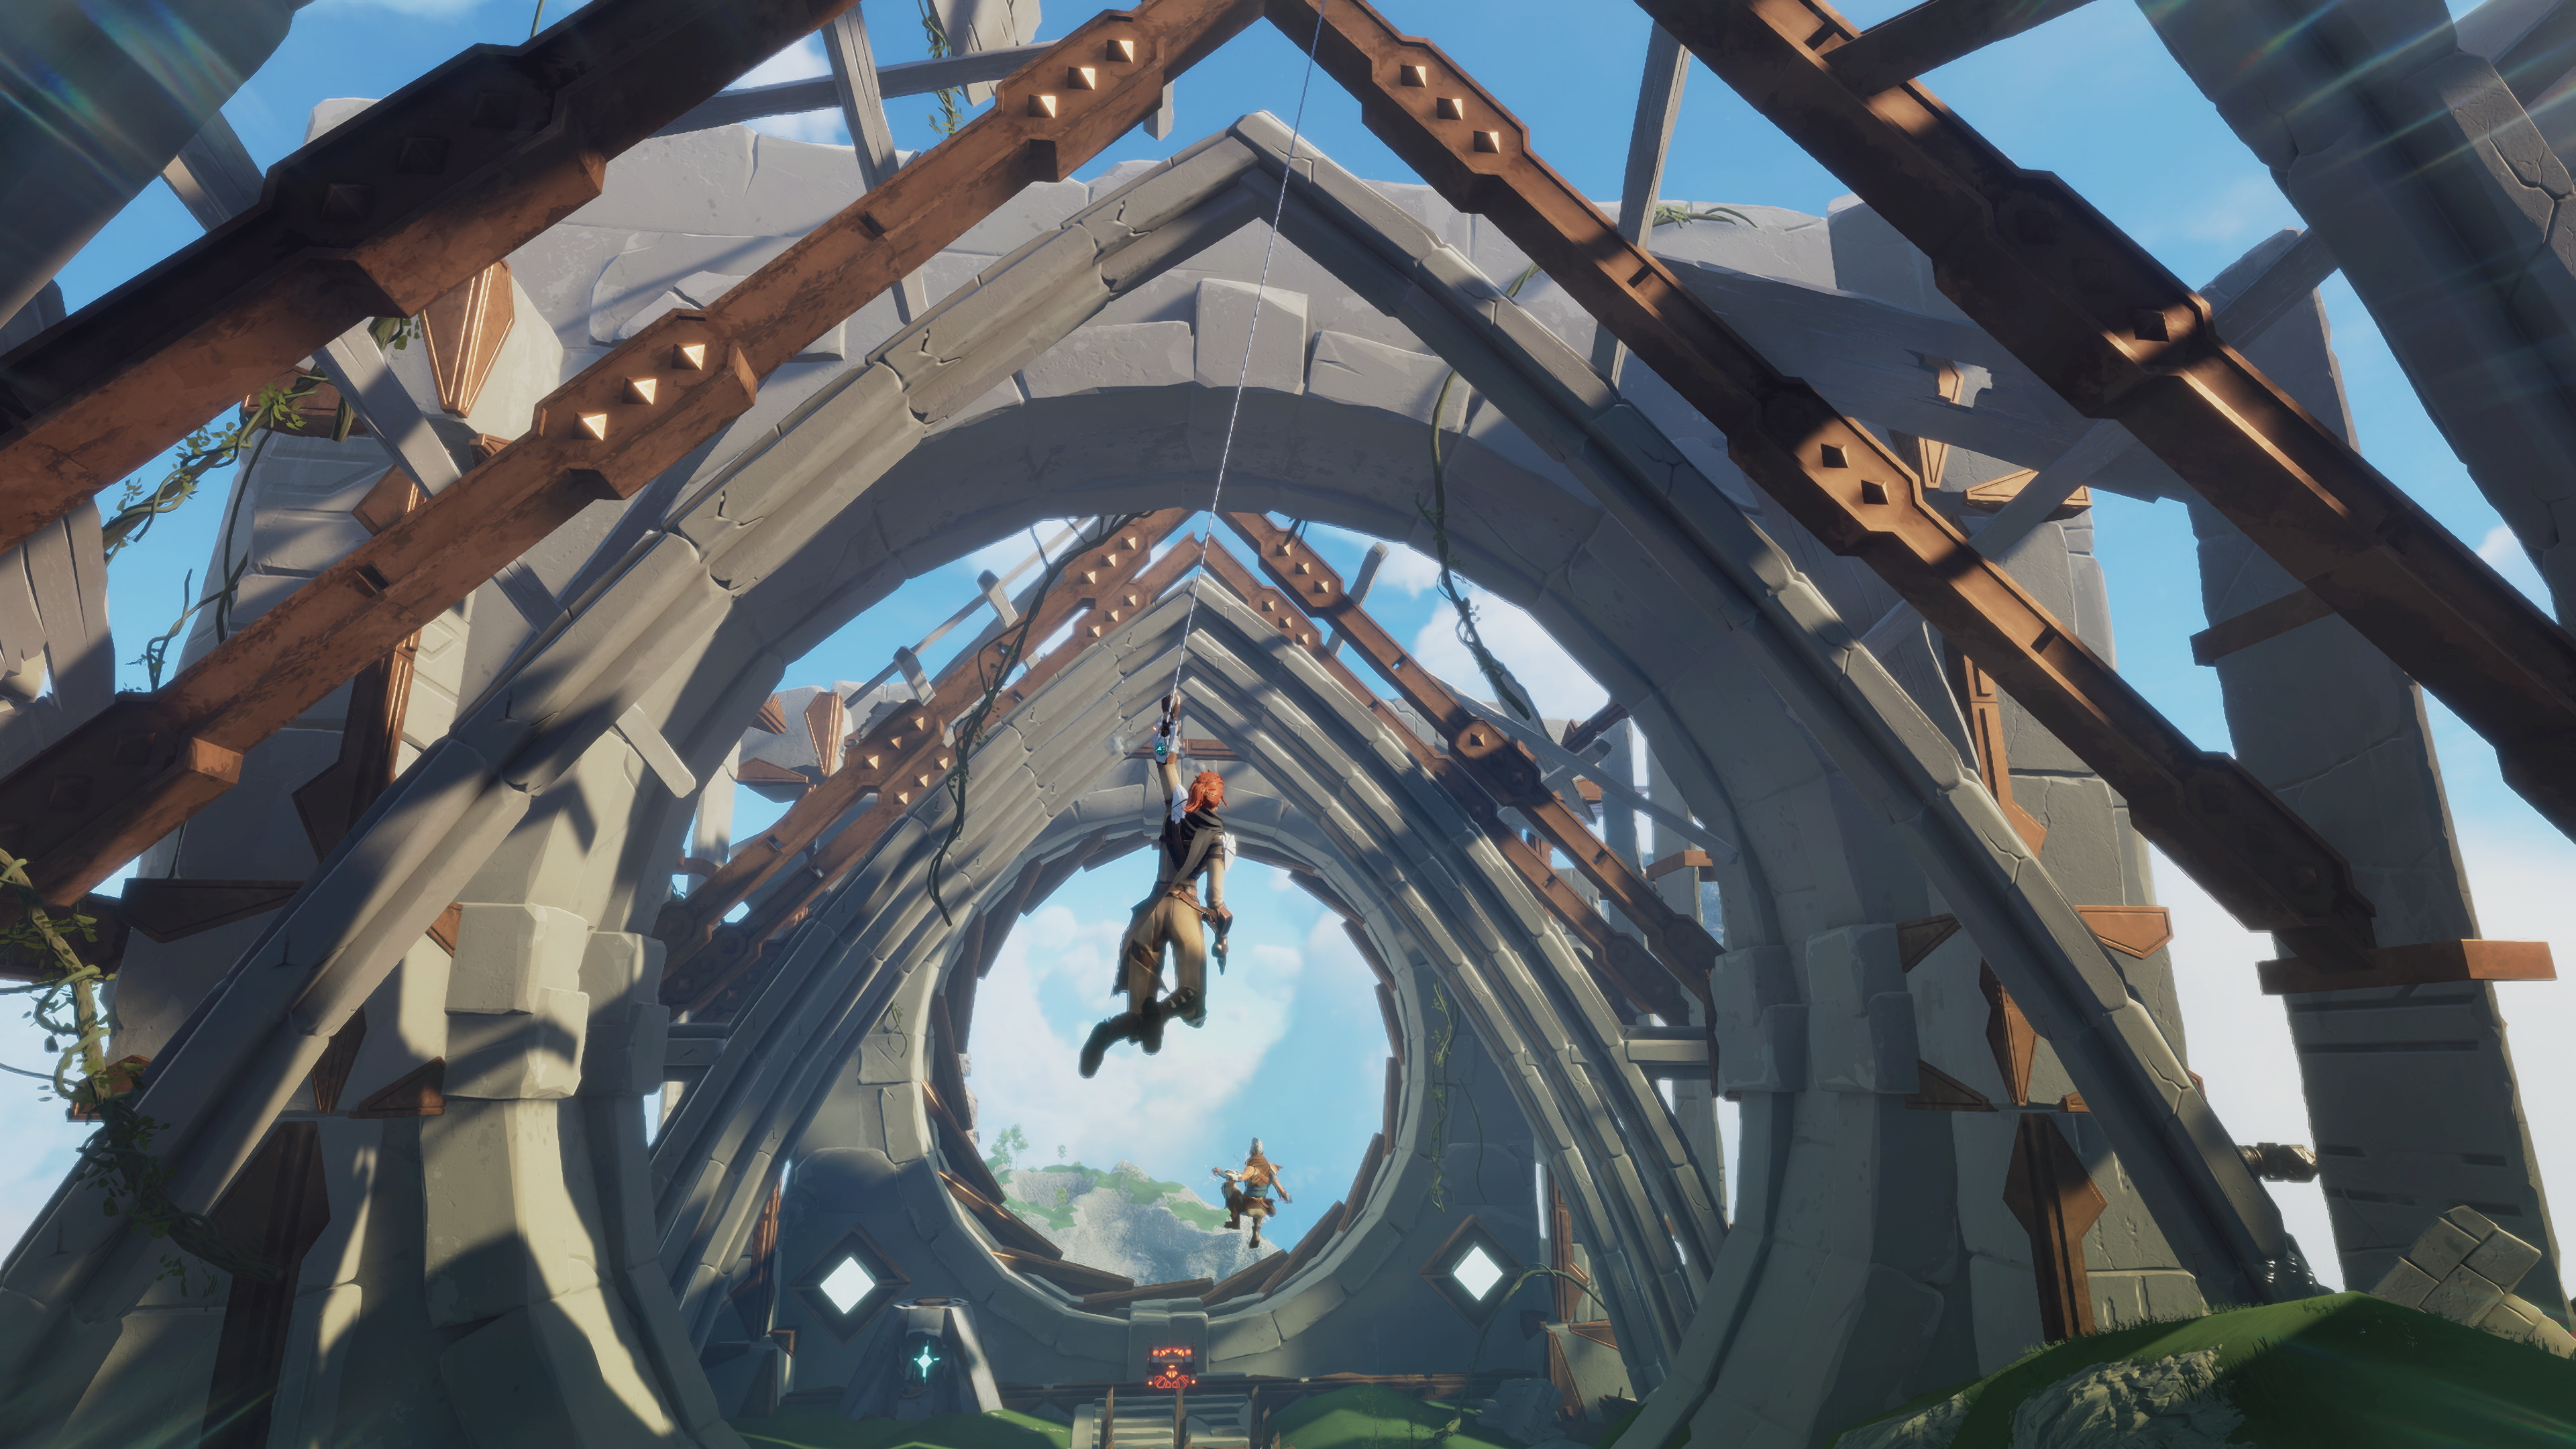 “Lost Skies is inspired by an earlier game made by Bossa, Worlds Adrift, and we have taken many popular mechanics and improved them. The crags and ruins of our islands make perfect playgrounds for grappling and swinging, with our physics-based grappling hook - our community is already finding new ways to reach unexpected places using agility and momentum.”